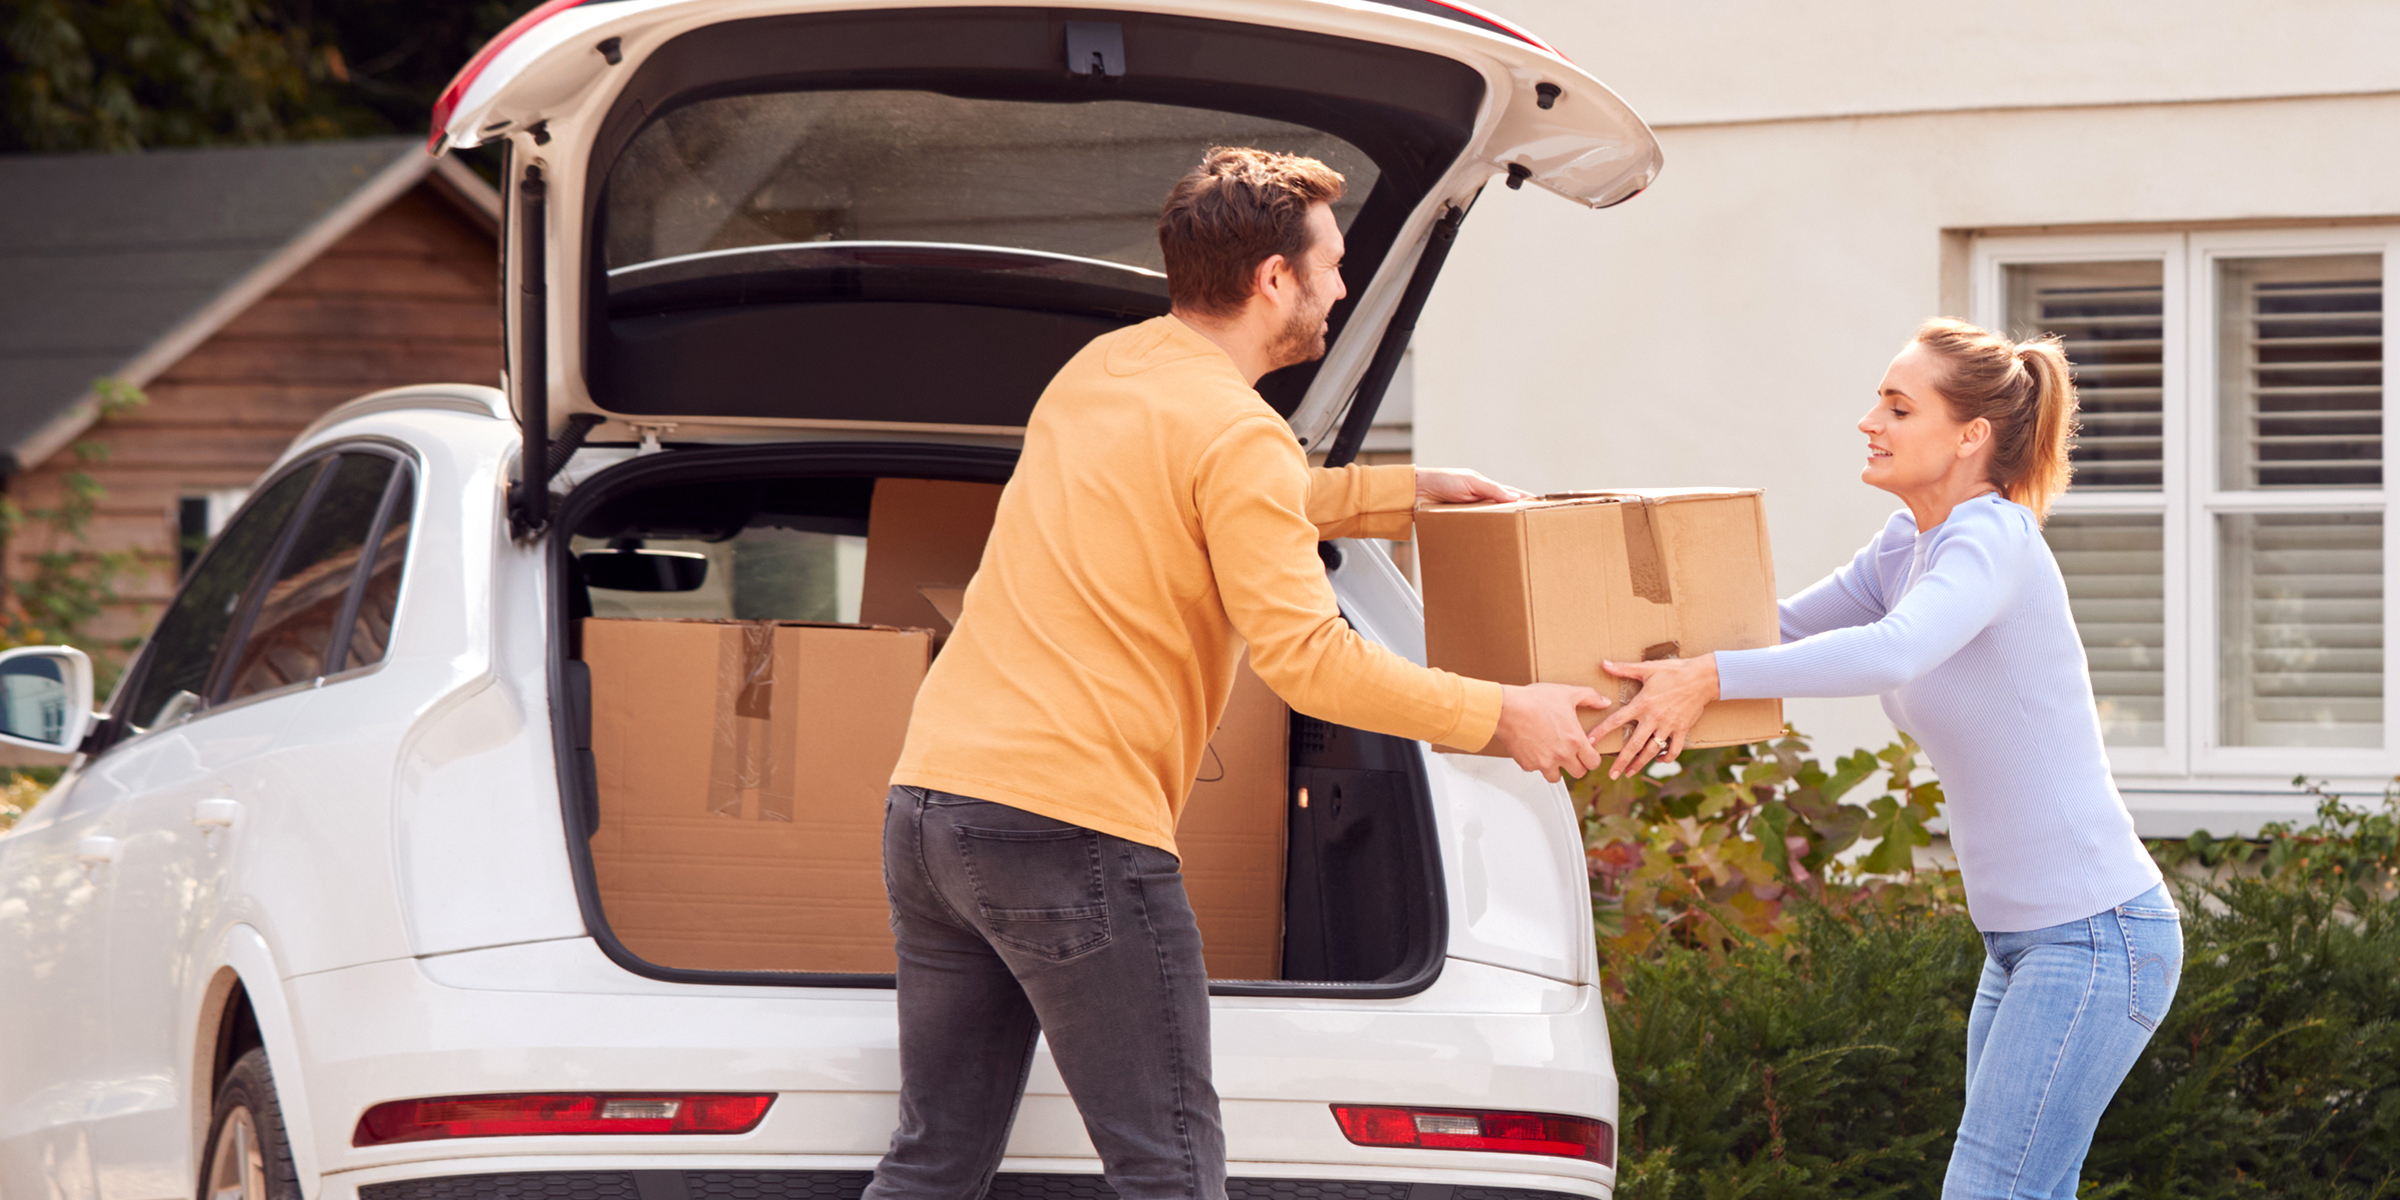 Man and woman loading boxes in a car | Source: Shutterstock